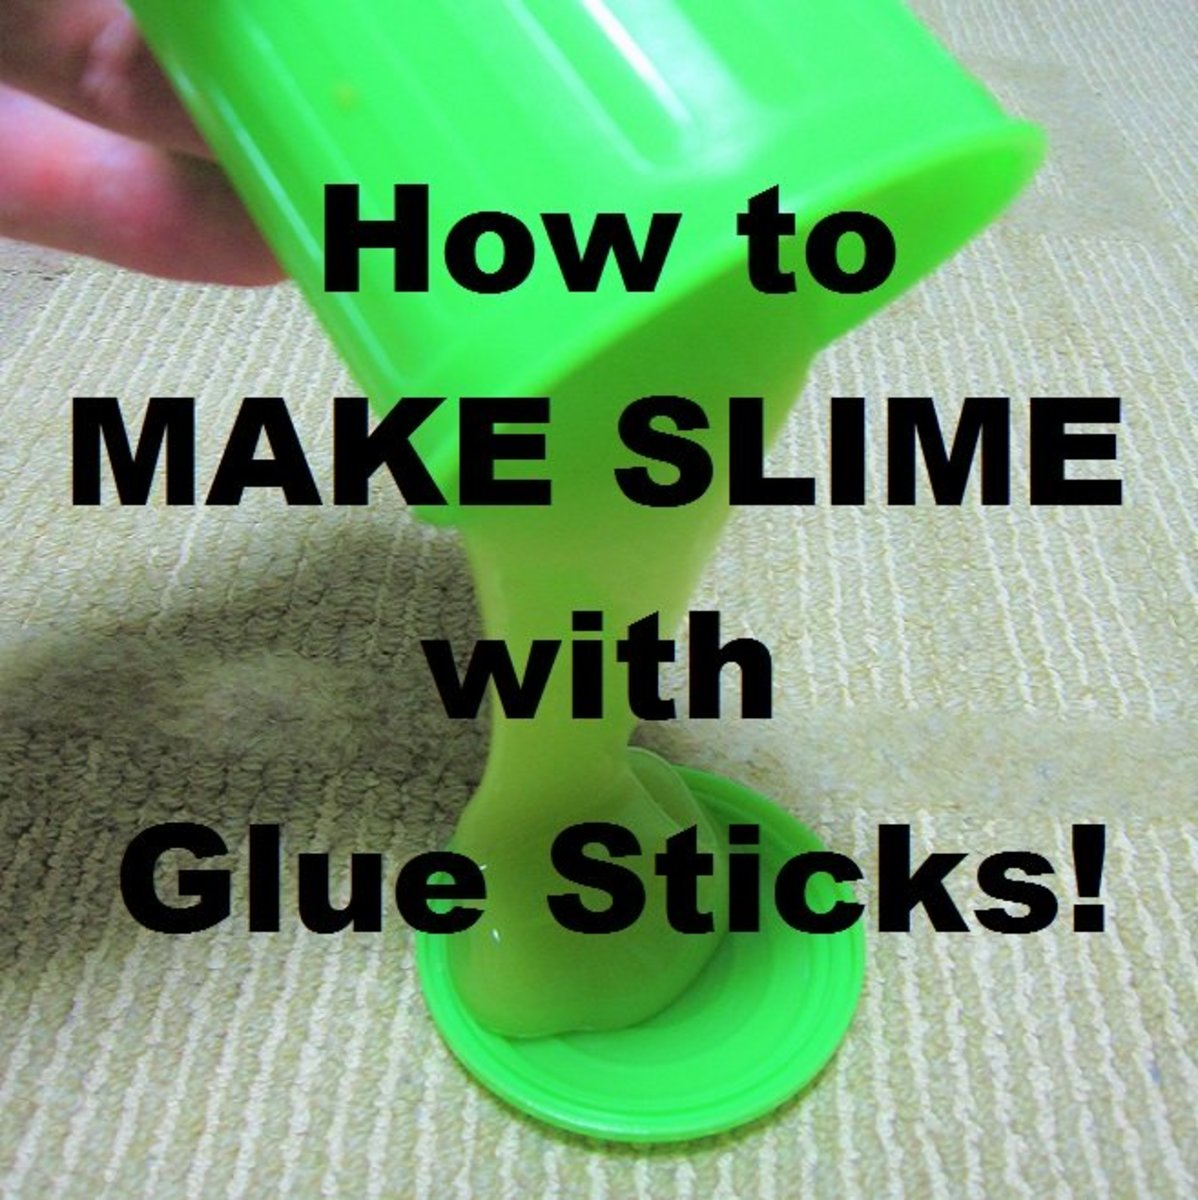 How to Make Slime With a Glue Stick